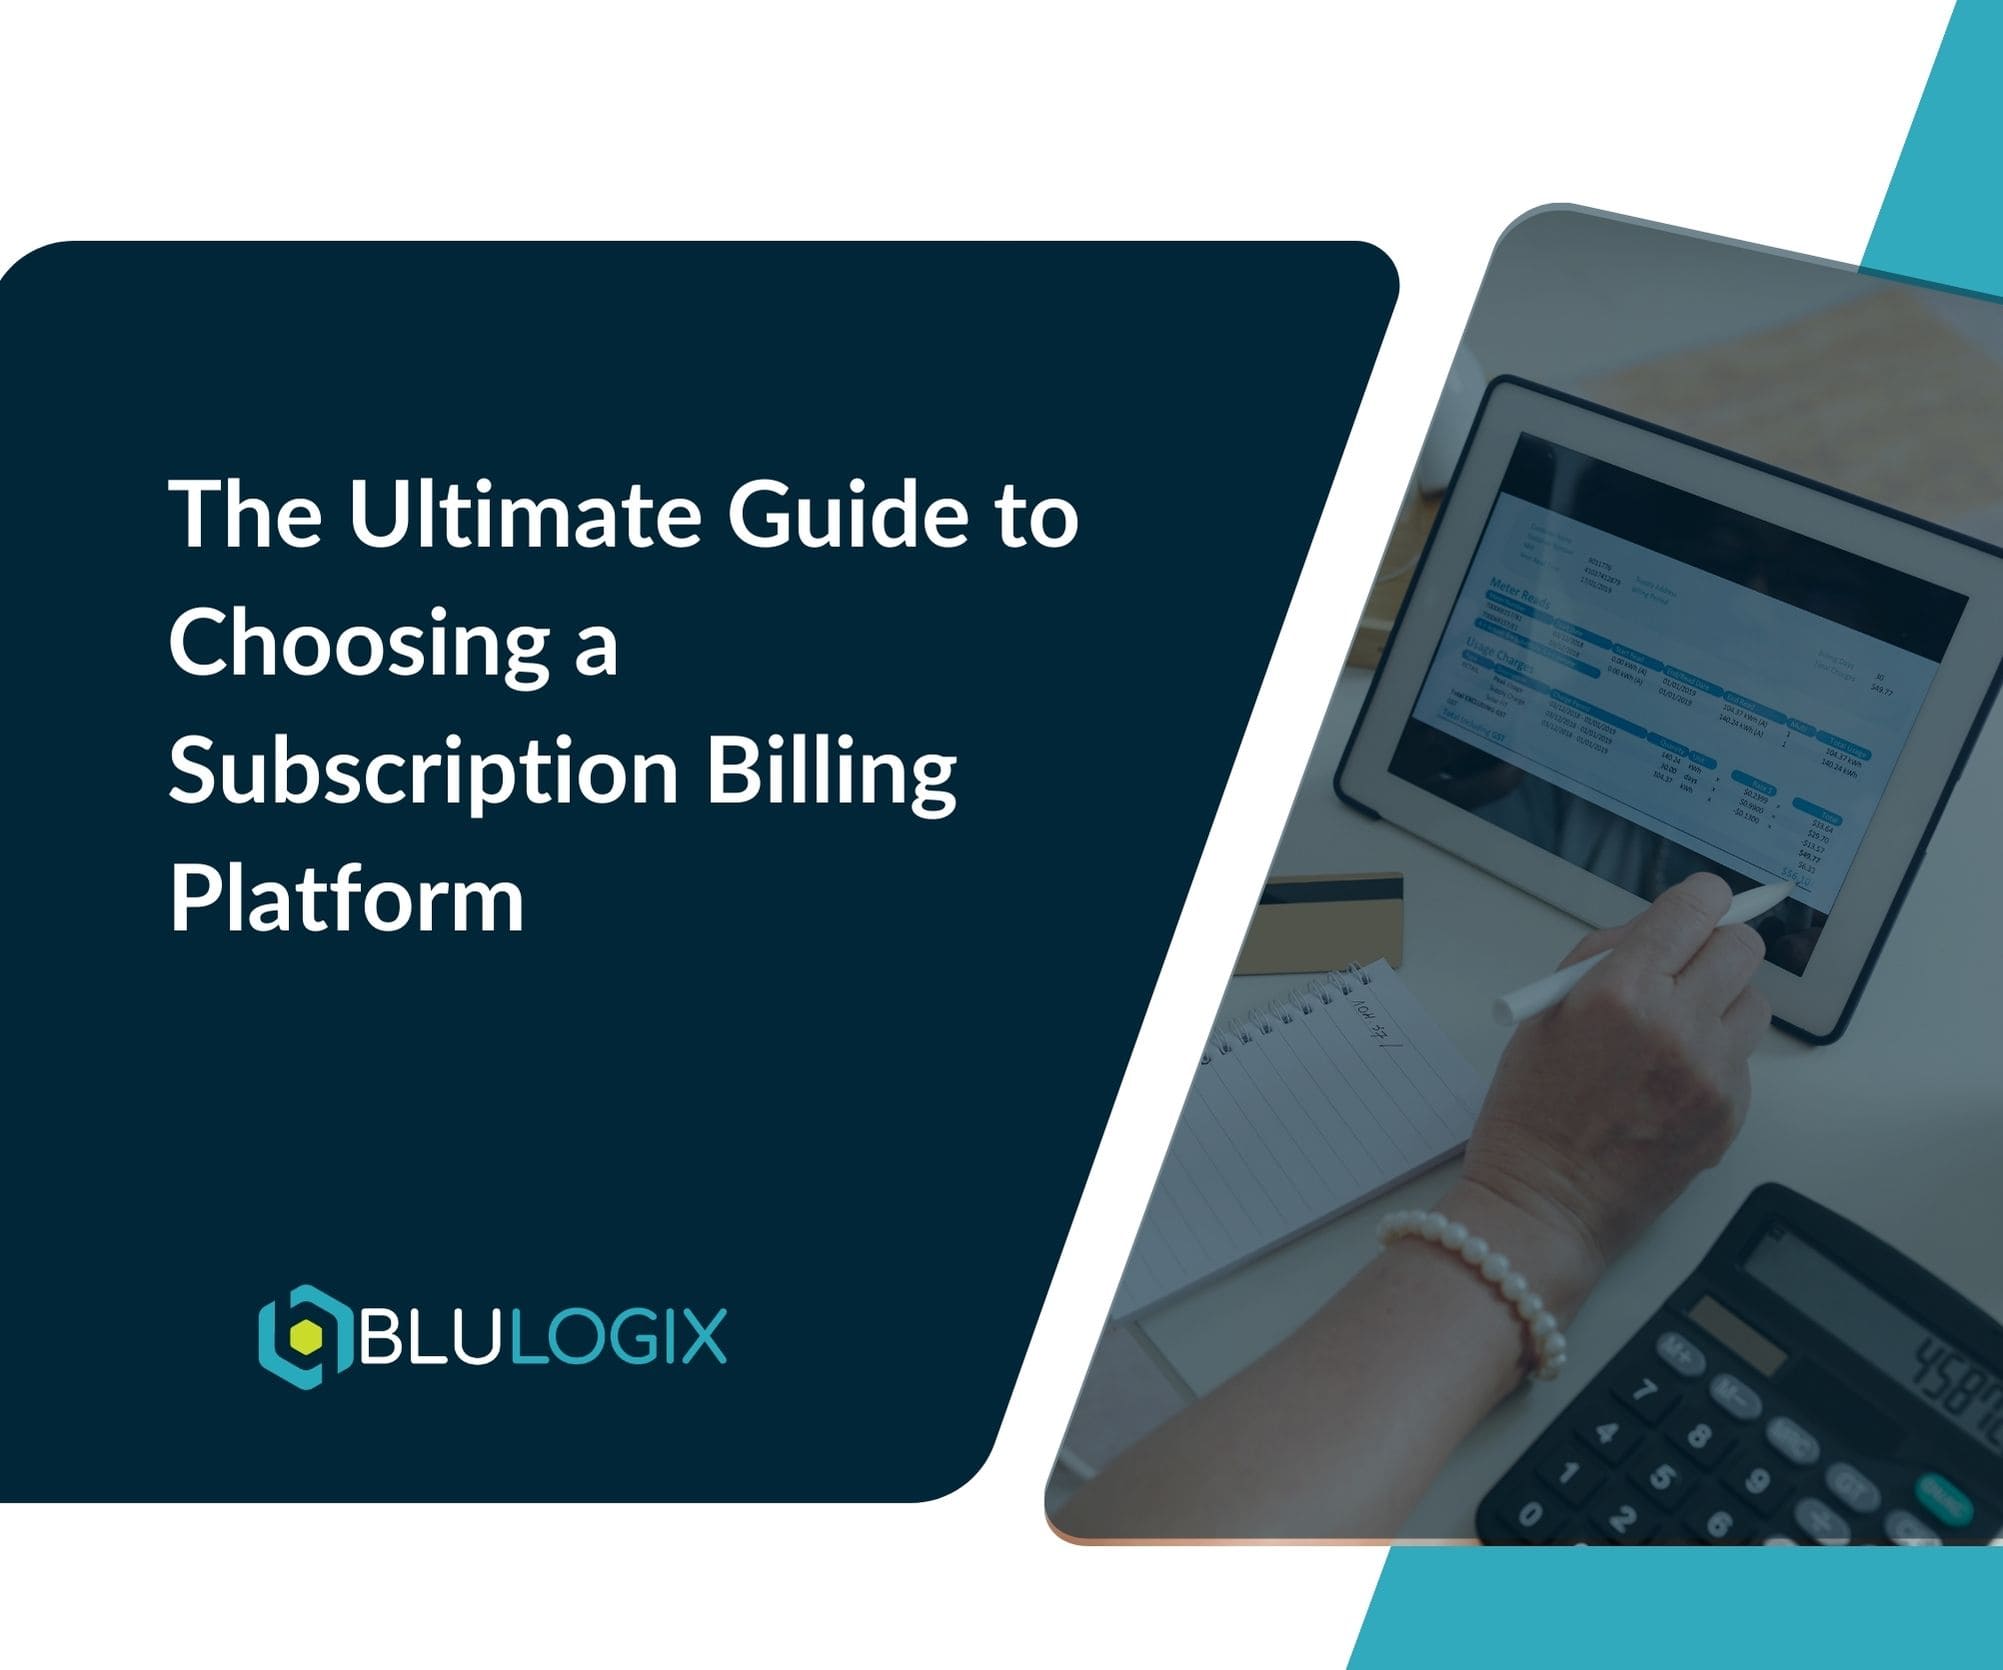 The Ultimate Guide to Choosing a Subscription Billing Platform